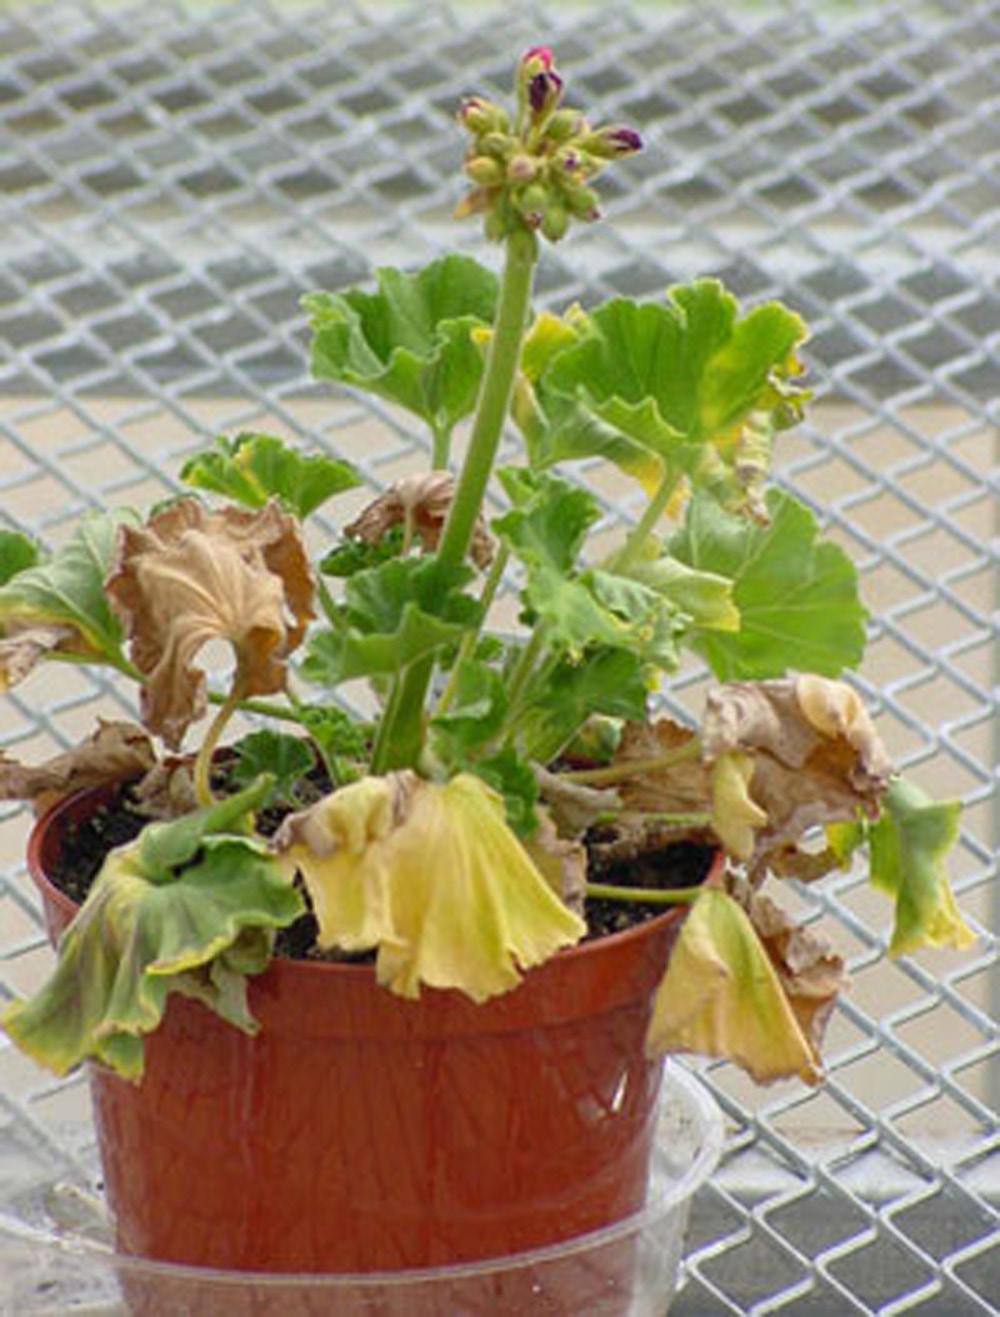 Risk Reduction and Disease Management The introduction and discovery of this pathogen in a geranium production facility could have serious financial consequences.